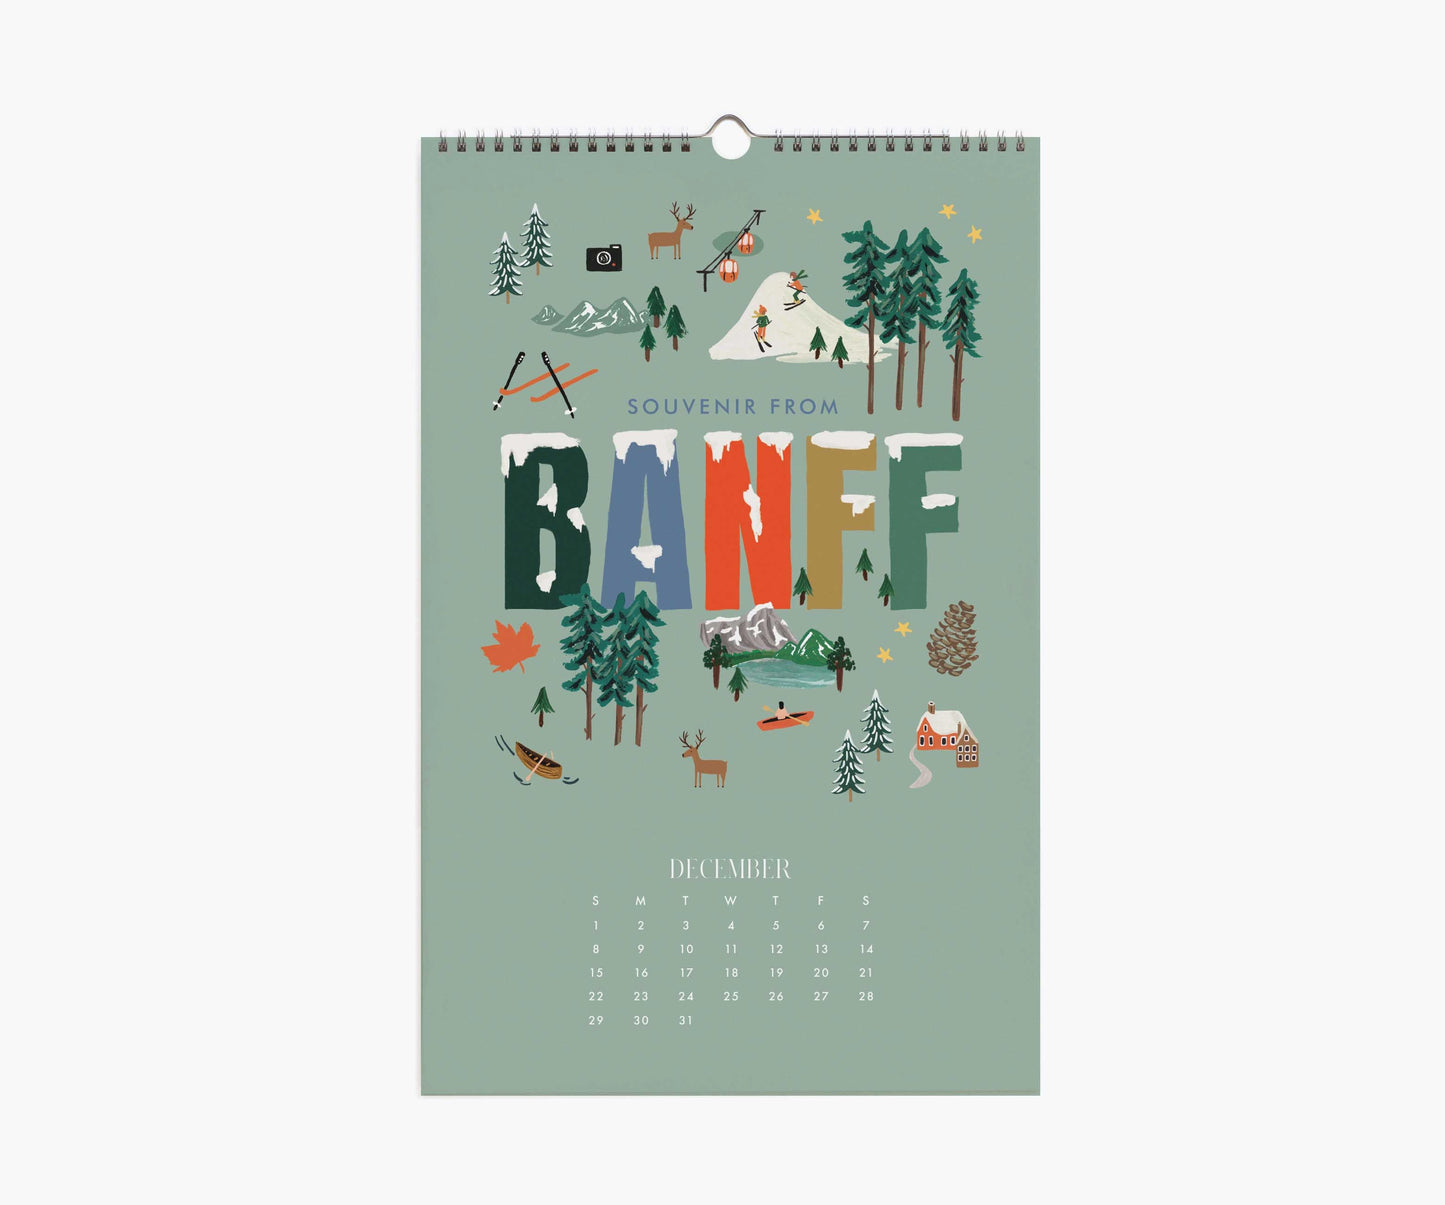 Väggkalender Greetings from Around the World 2024, Rifle Paper